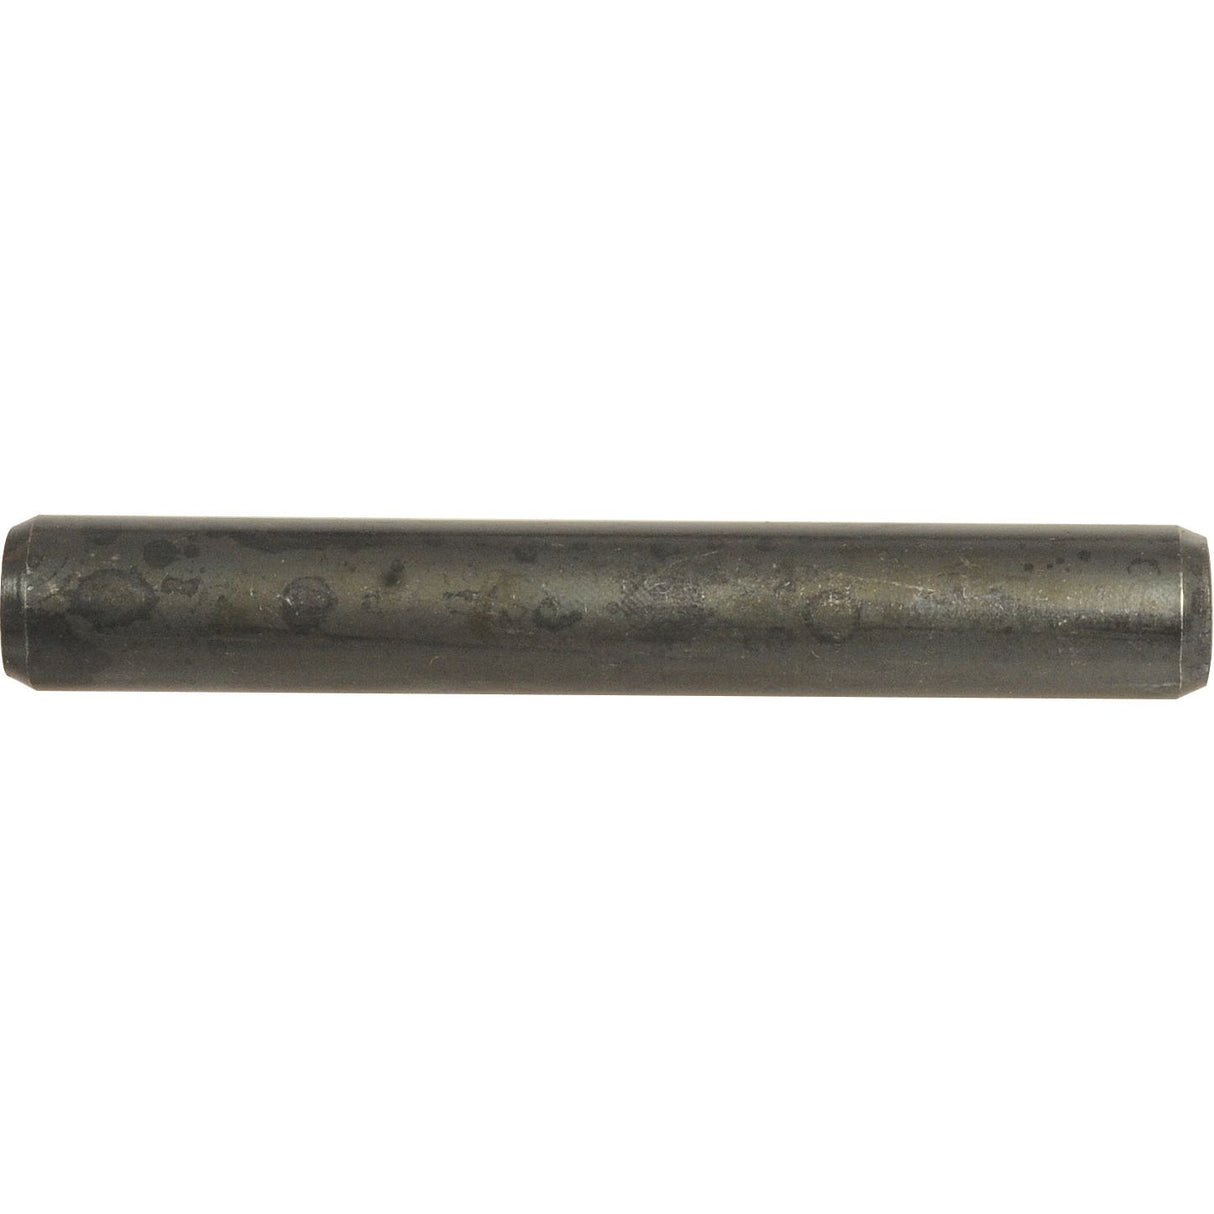 Imperial Roll Pin, Pin⌀5/16'' x 3''
 - S.1144 - Farming Parts